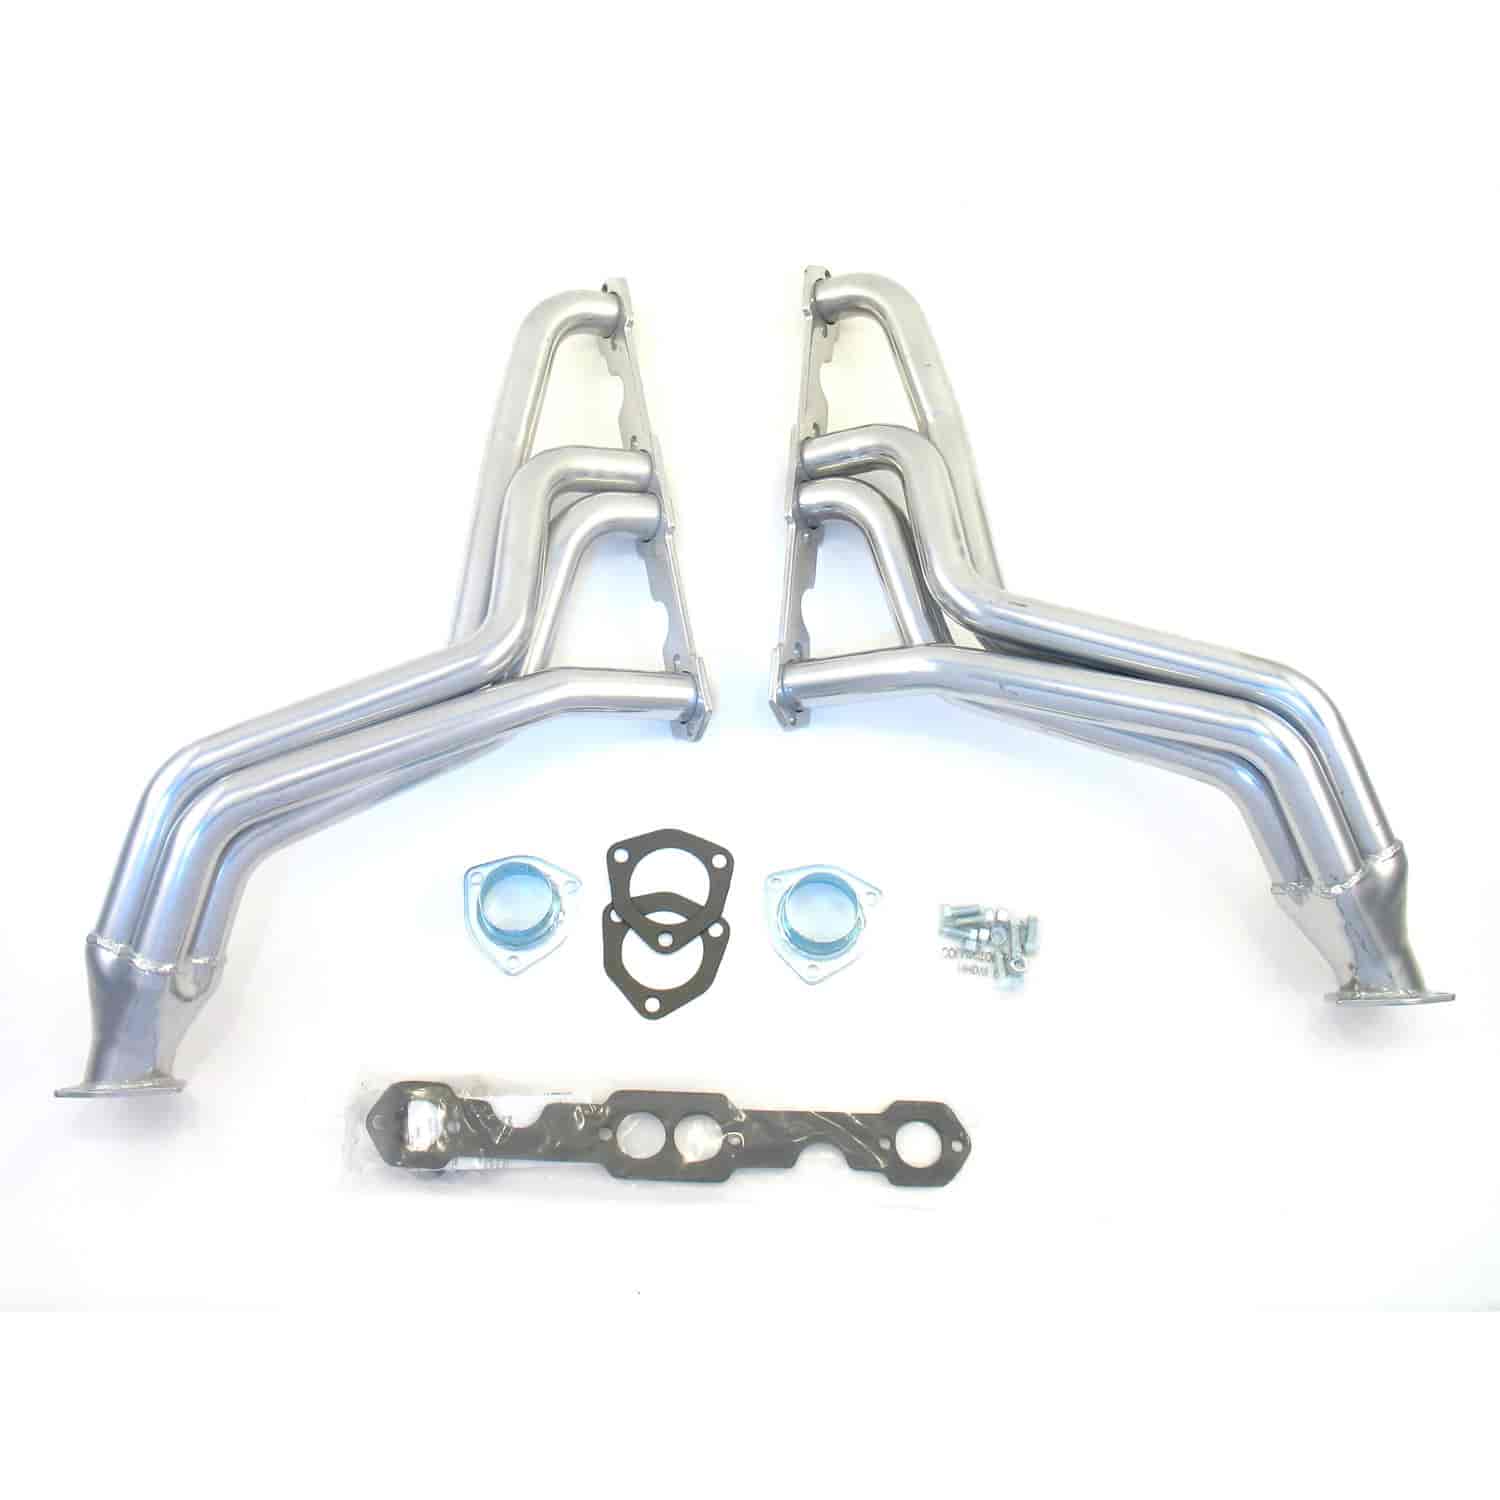 265-400 Small Block Header 1-5/8" Primary Tubes